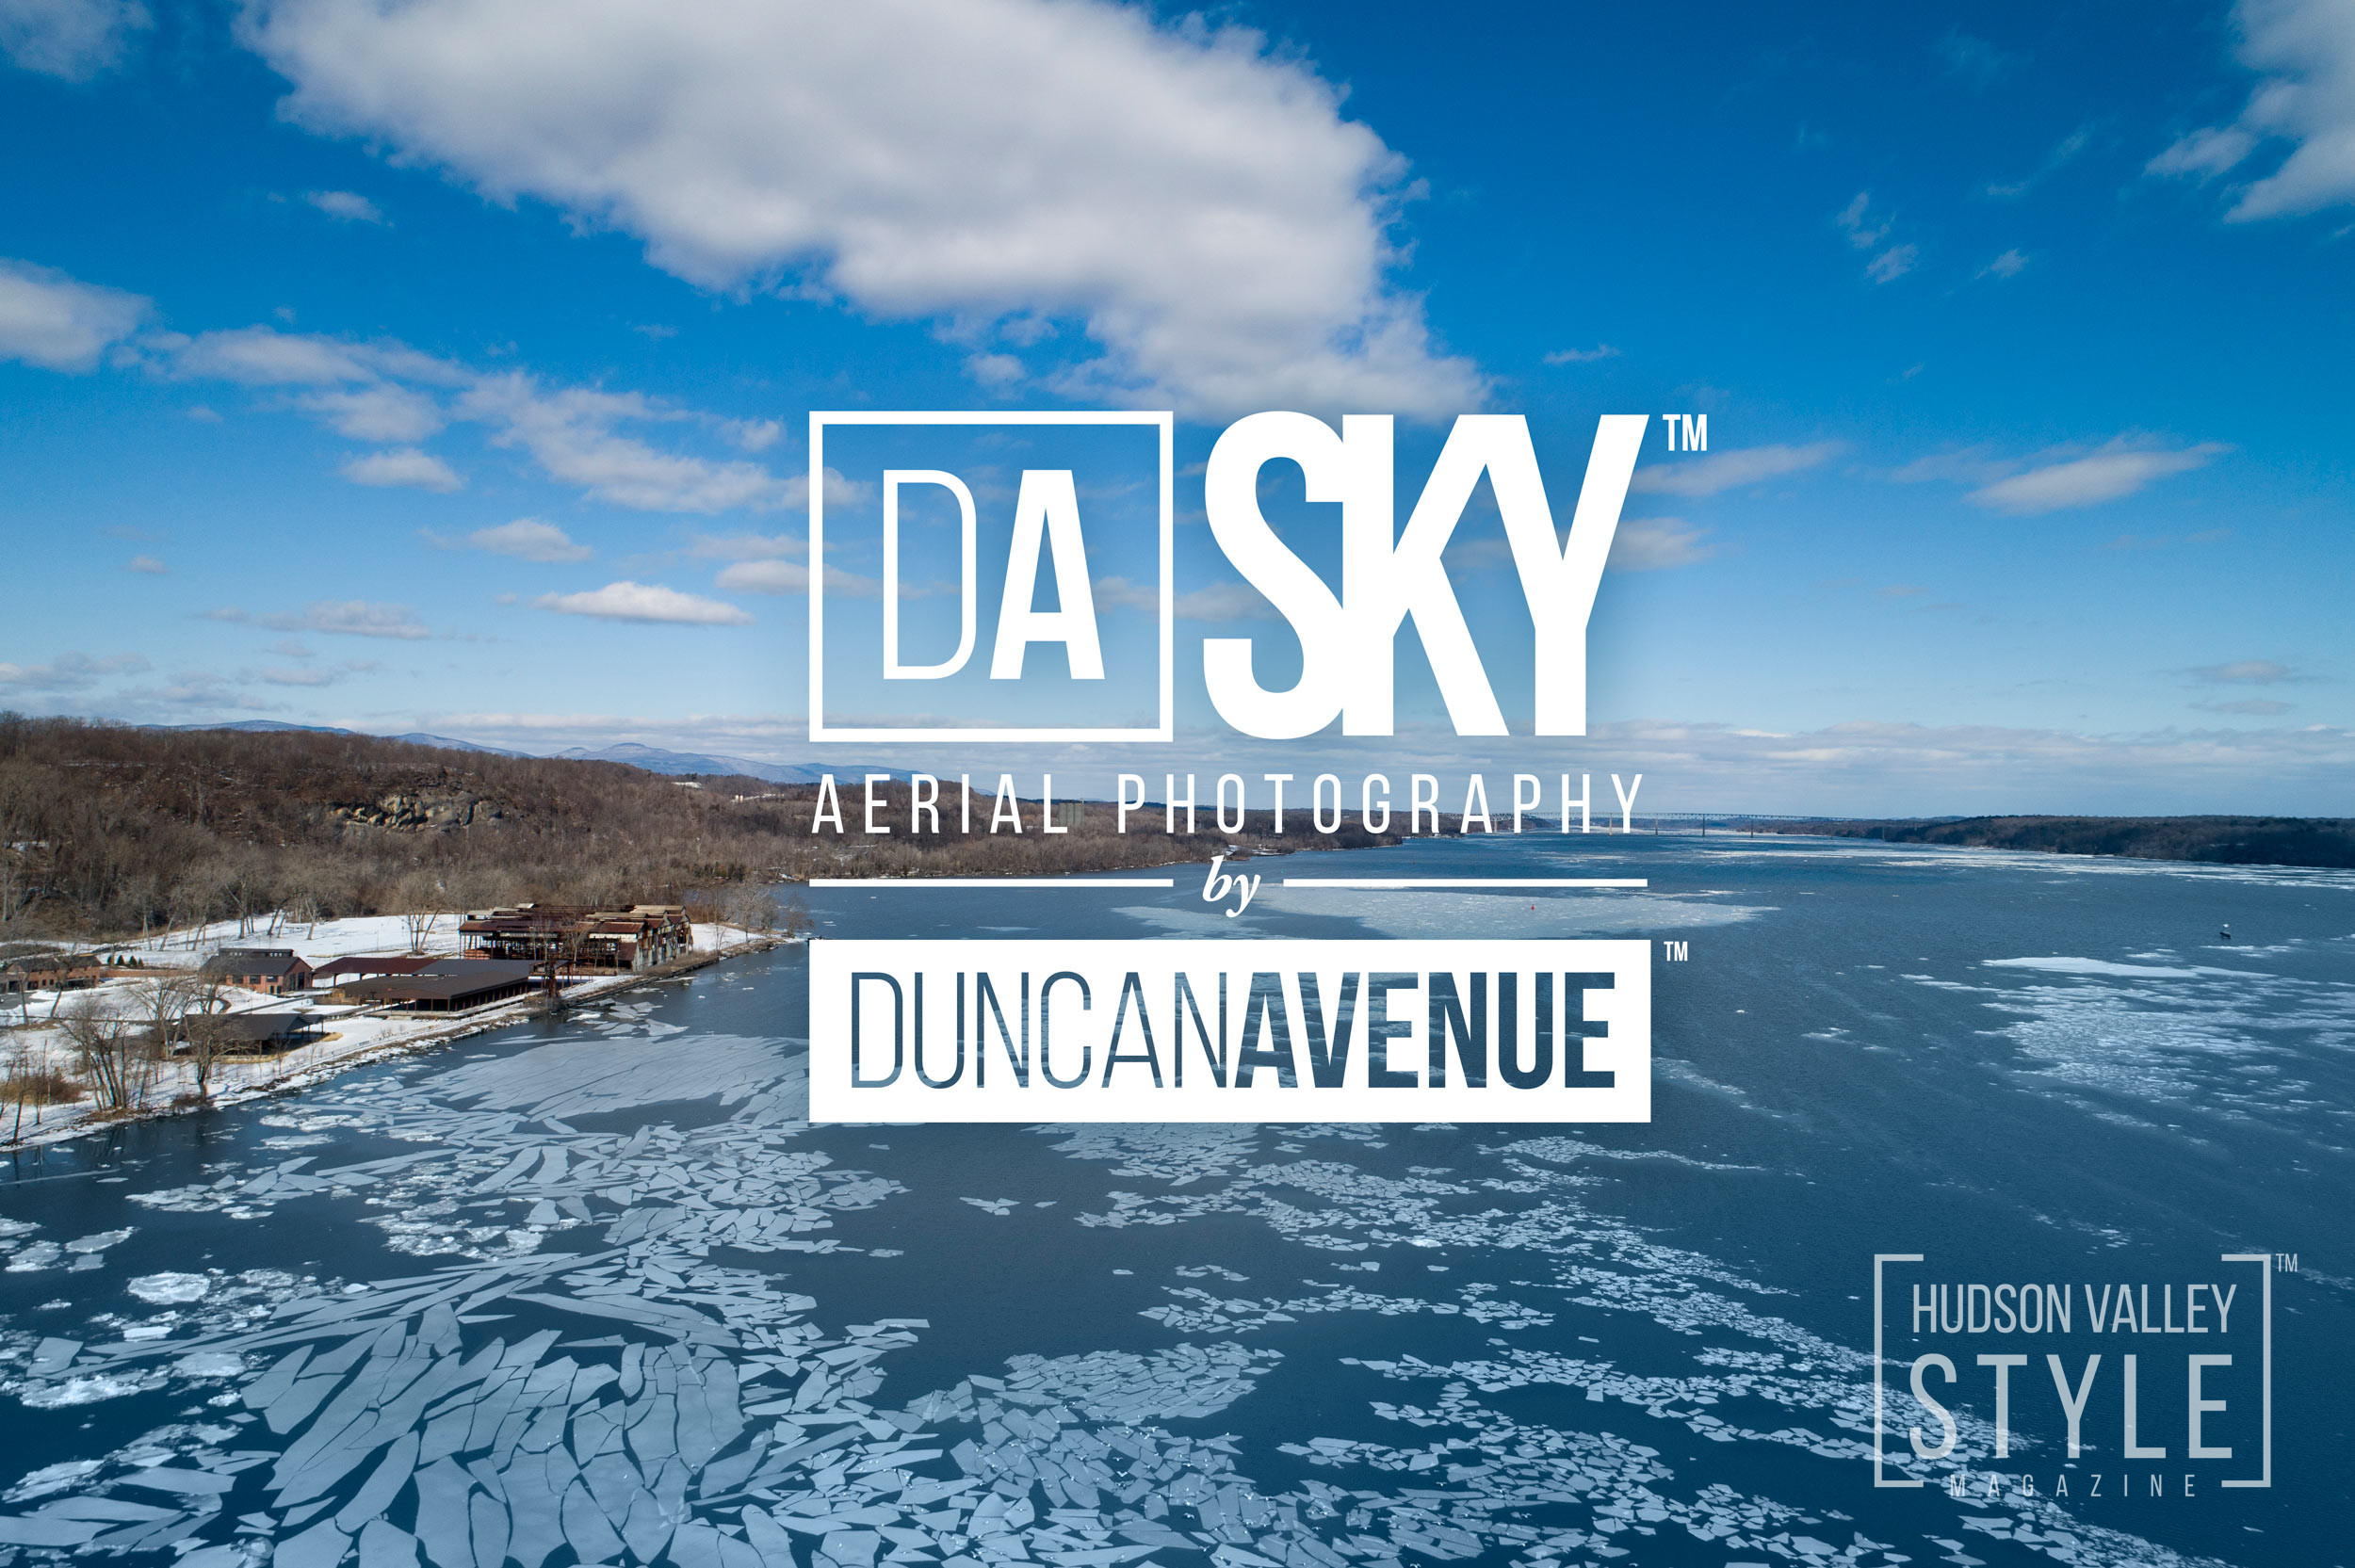 Flying above Kingston – the first capital of New York - Aerial photography by DA SKY Services (Duncan Avenue Group)